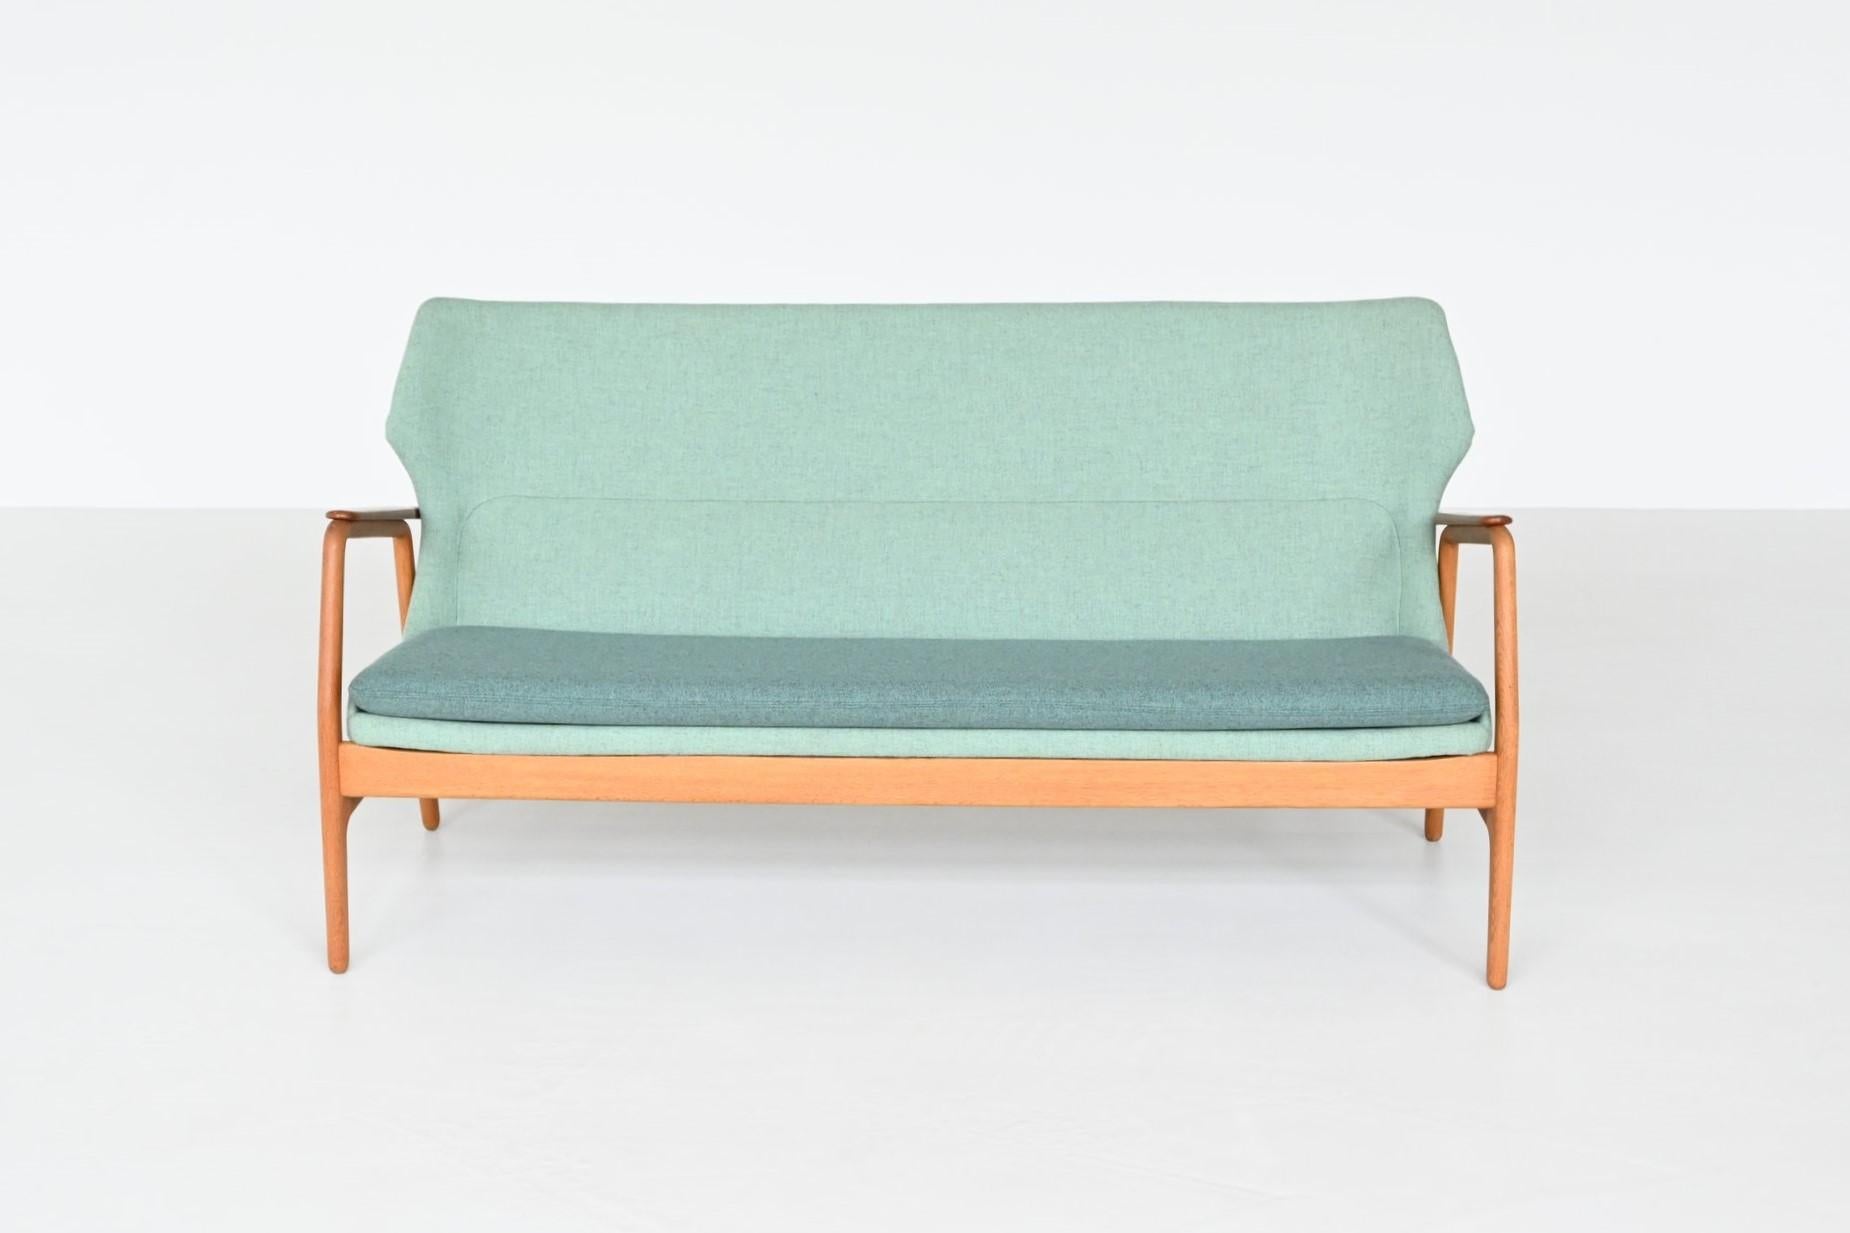 Fantastic shaped sofa designed by Arnold Madsen & Henri Schubell for Bovenkamp, The Netherlands 1960. Aksel Bender Madsen was contracted by Bovenkamp to work for them end 1950’s begin of the 1960’s. He designed and helped Bovenkamp to integrate